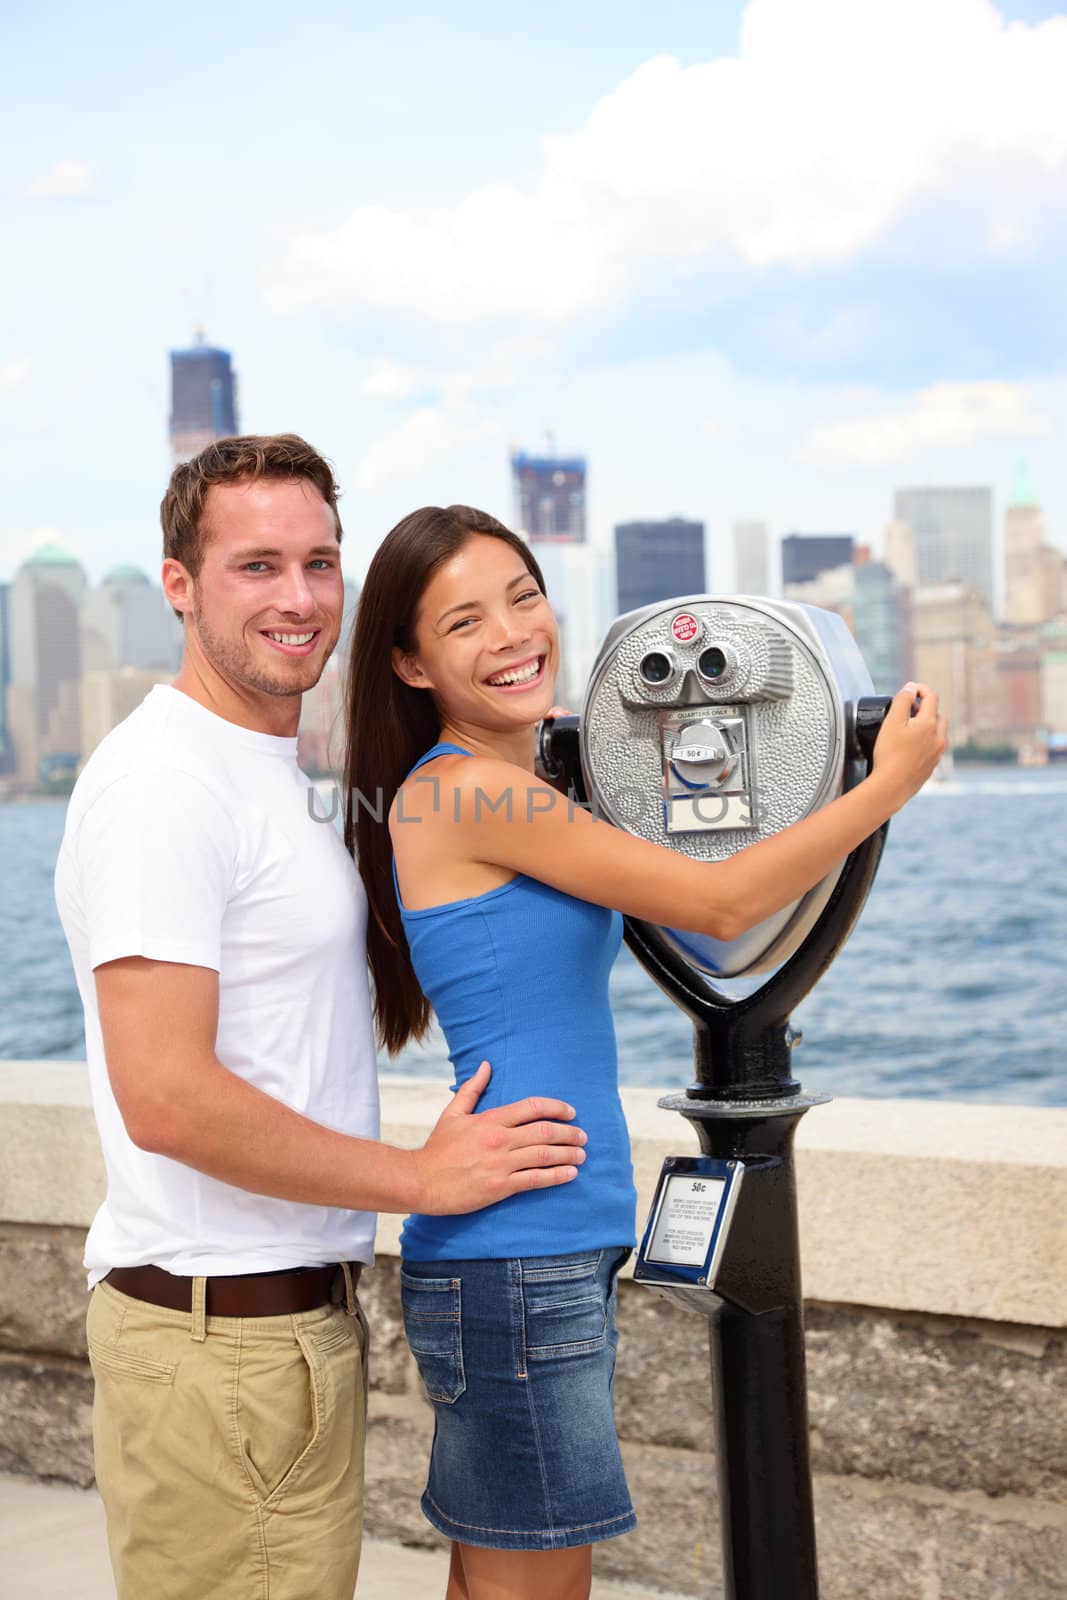 Tourists Couple - Tourism New York, USA. Happy romantic dating interracial couple sightseeing looking at Manhattan and New York City skyline from Ellis Island. Asian woman, Caucasian man.